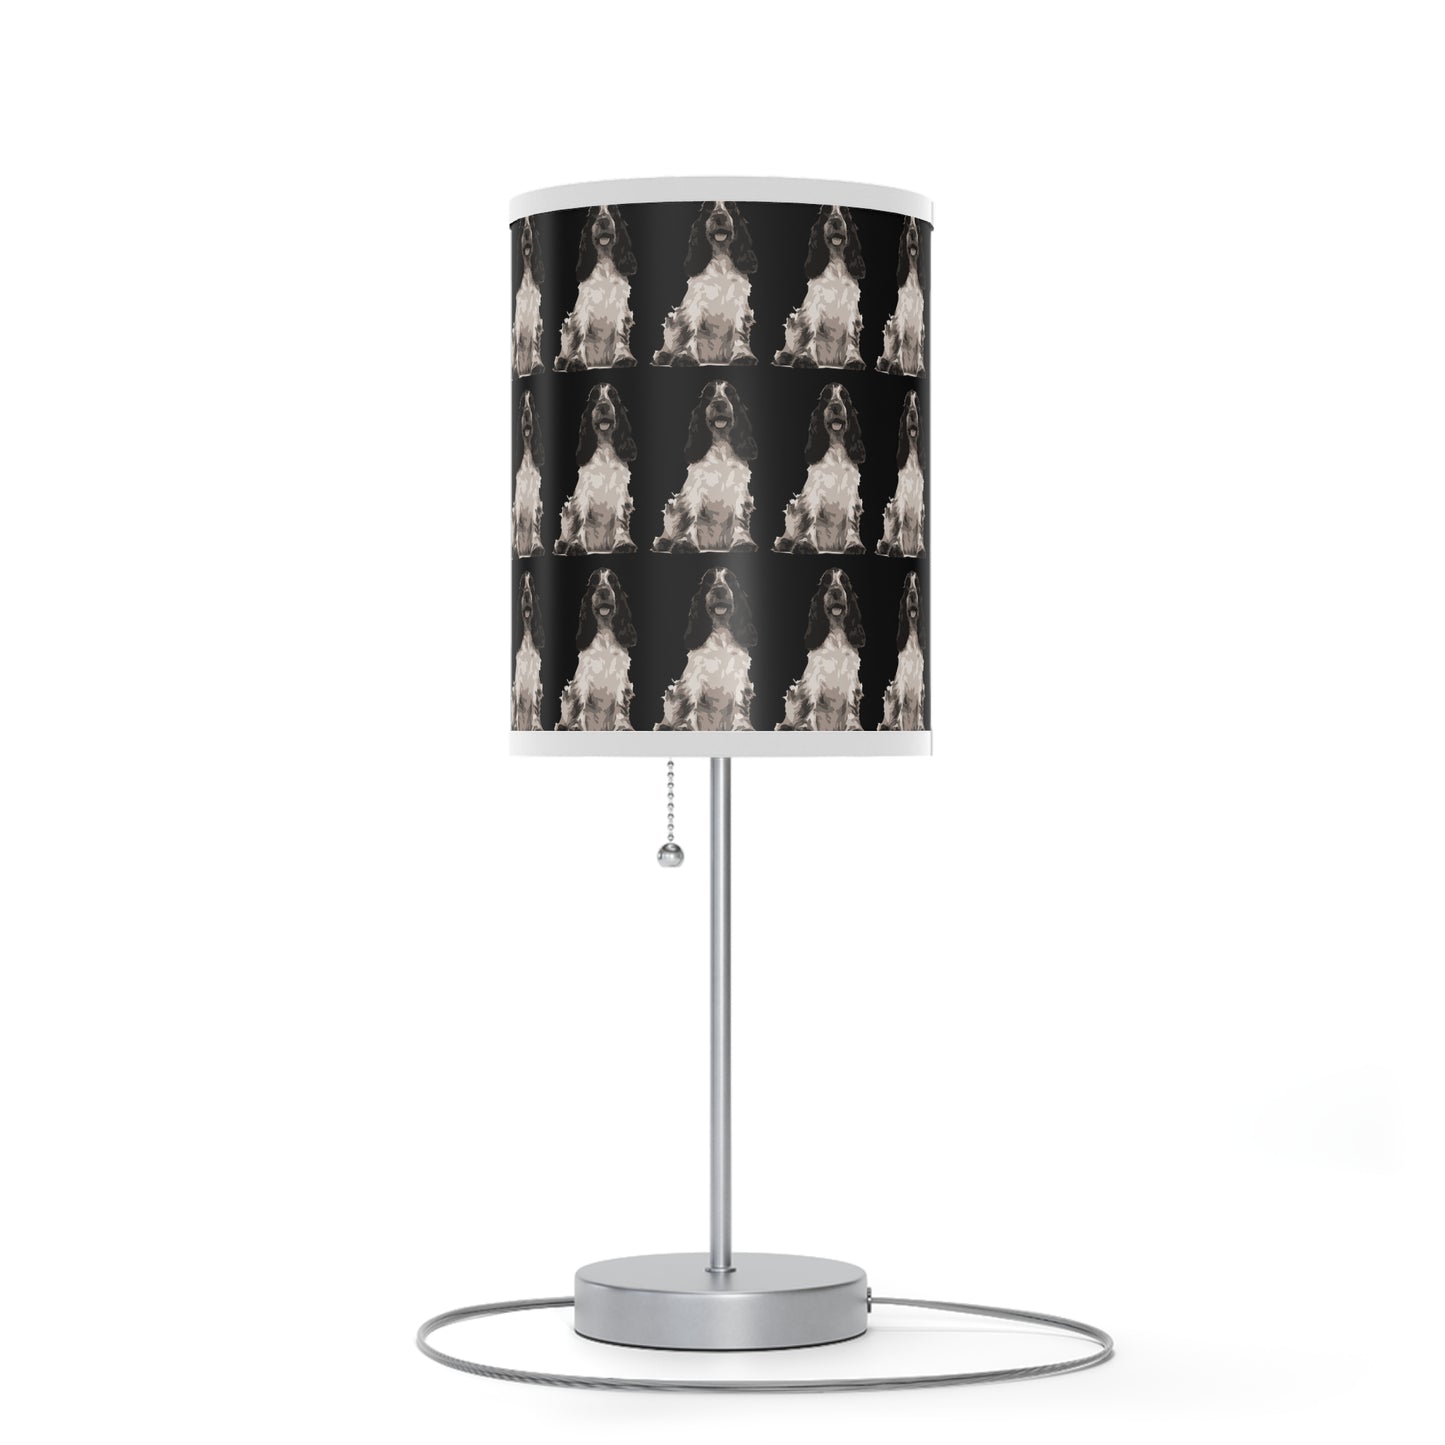 English cocker spaniel - Lamp on a Stand